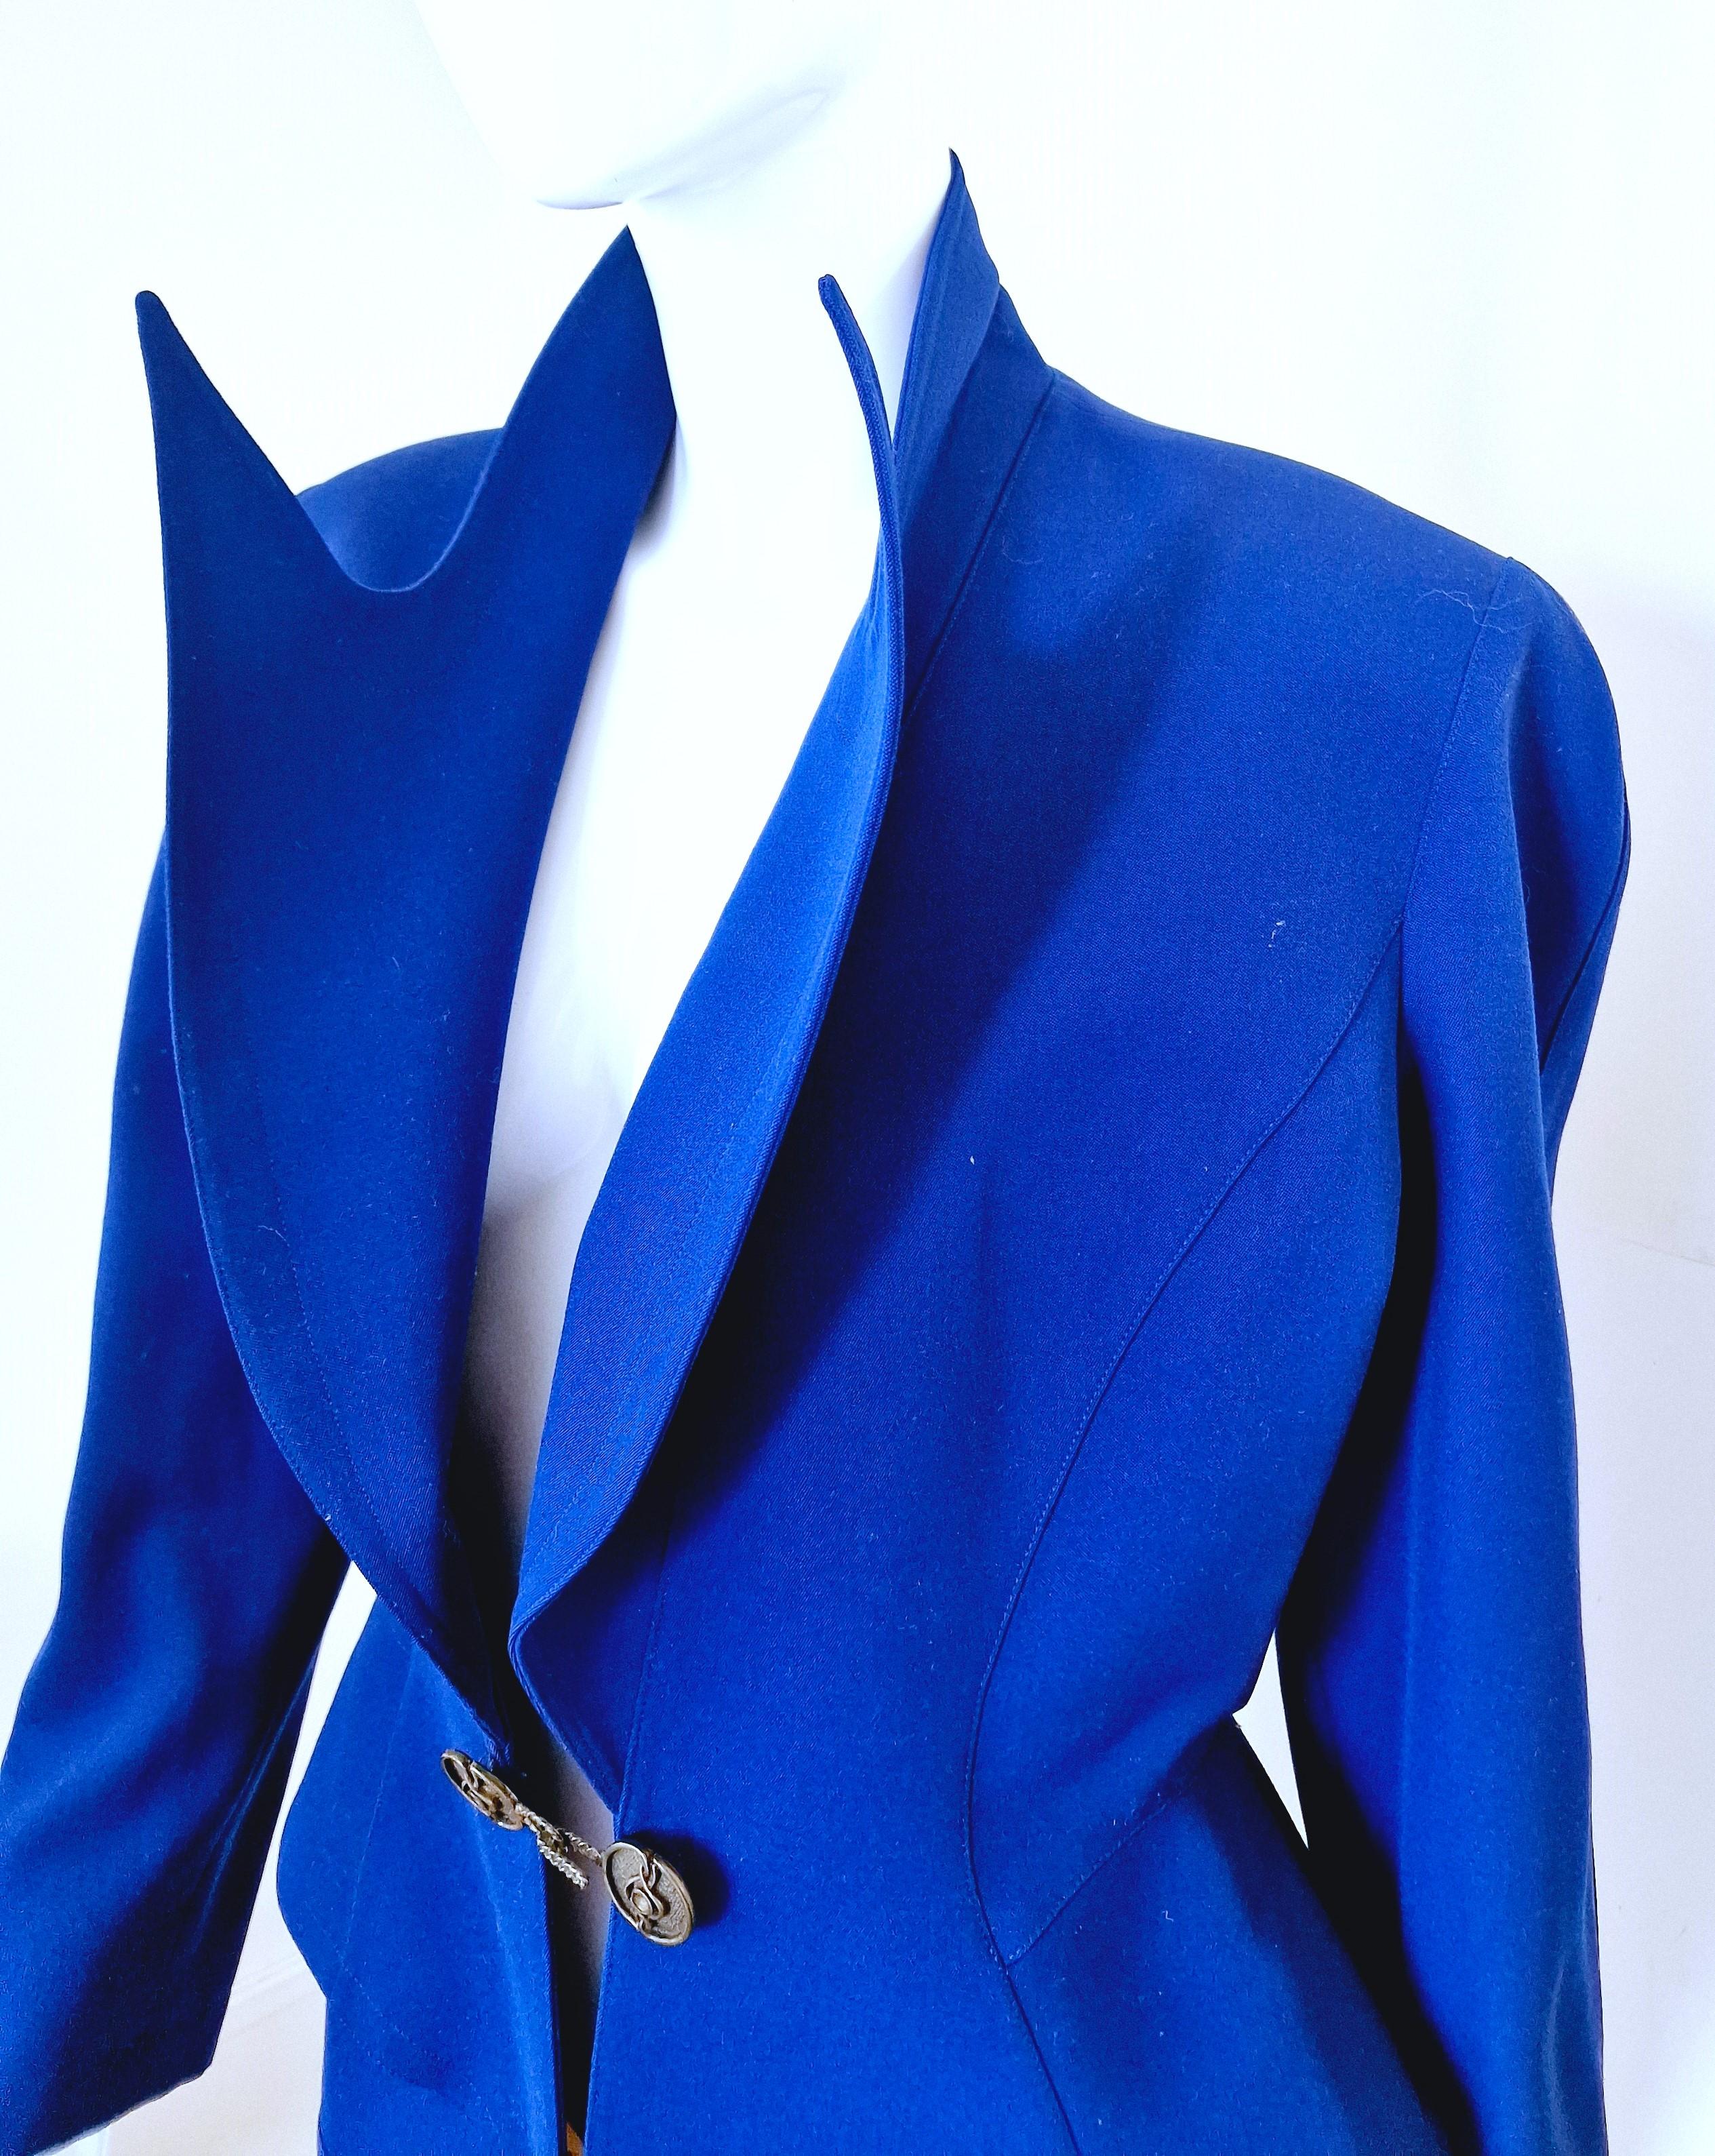 Thierry Mugler Vampire Blue Couture Chain Metal Vintage Large Blazer Jacket For Sale 5